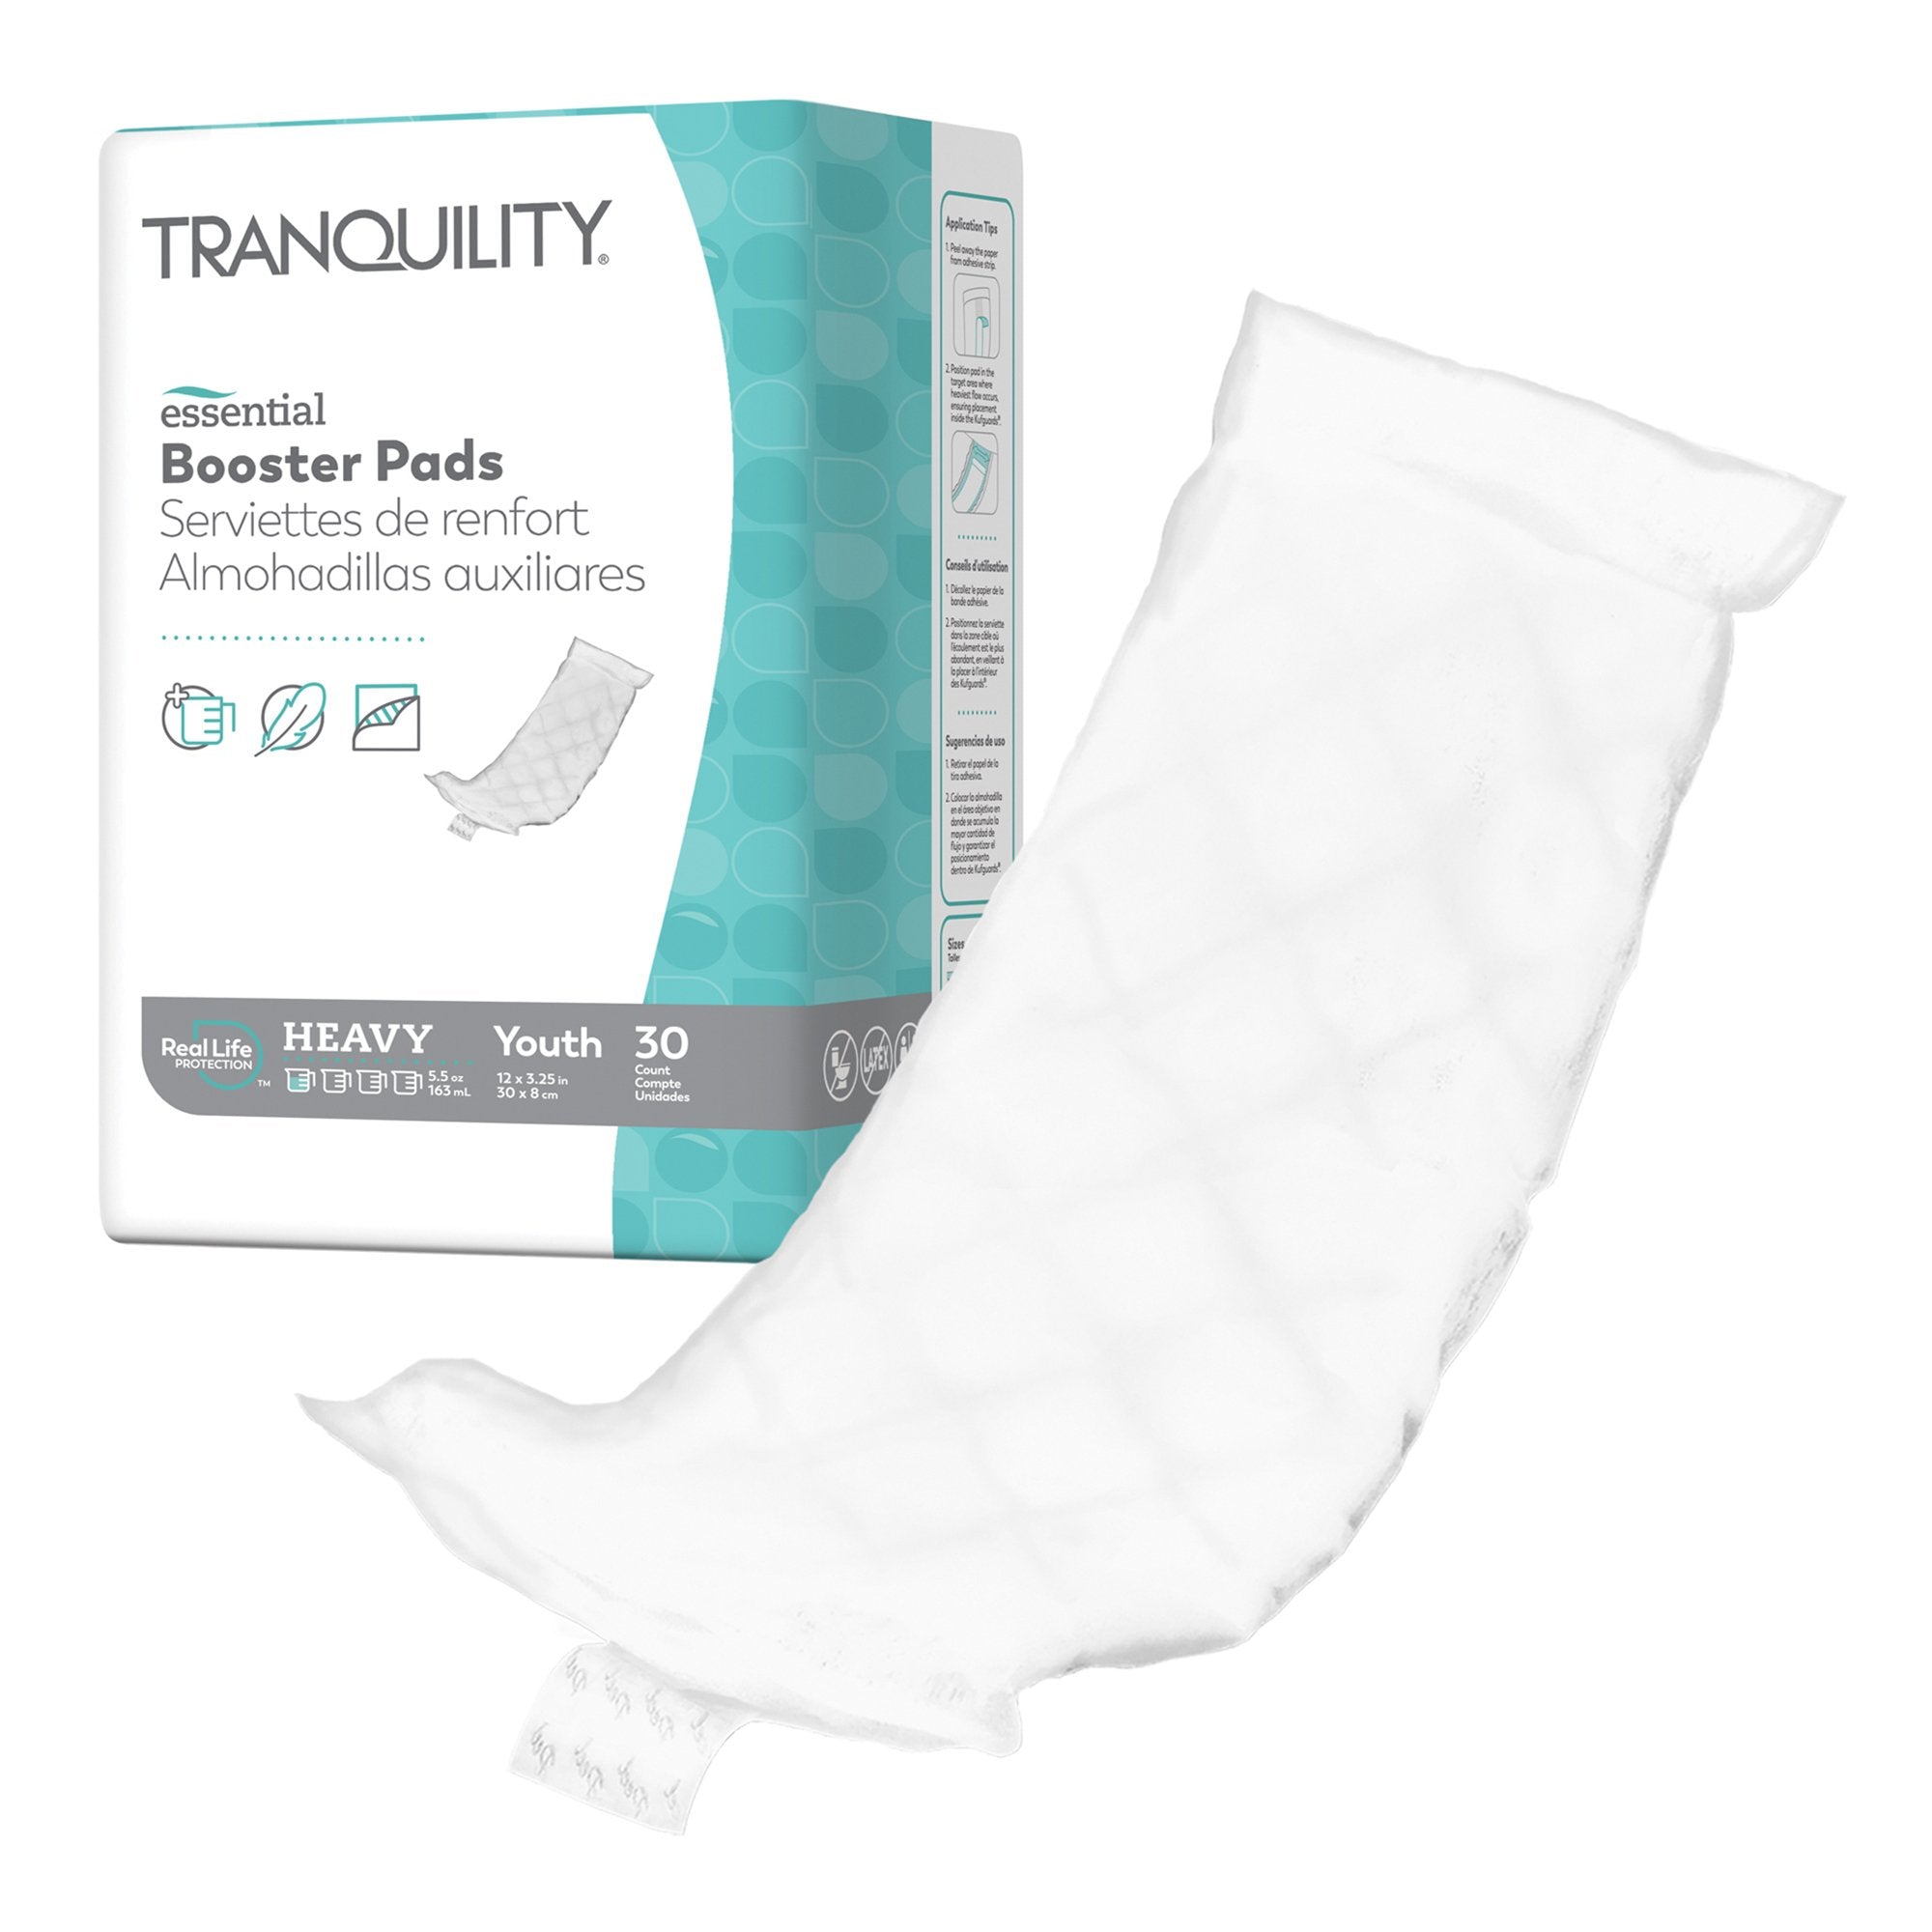 Booster Pad Tranquility® Essential 3-1/4 X 12 Inch Heavy Absorbency Superabsorbant Core One Size Fits Most